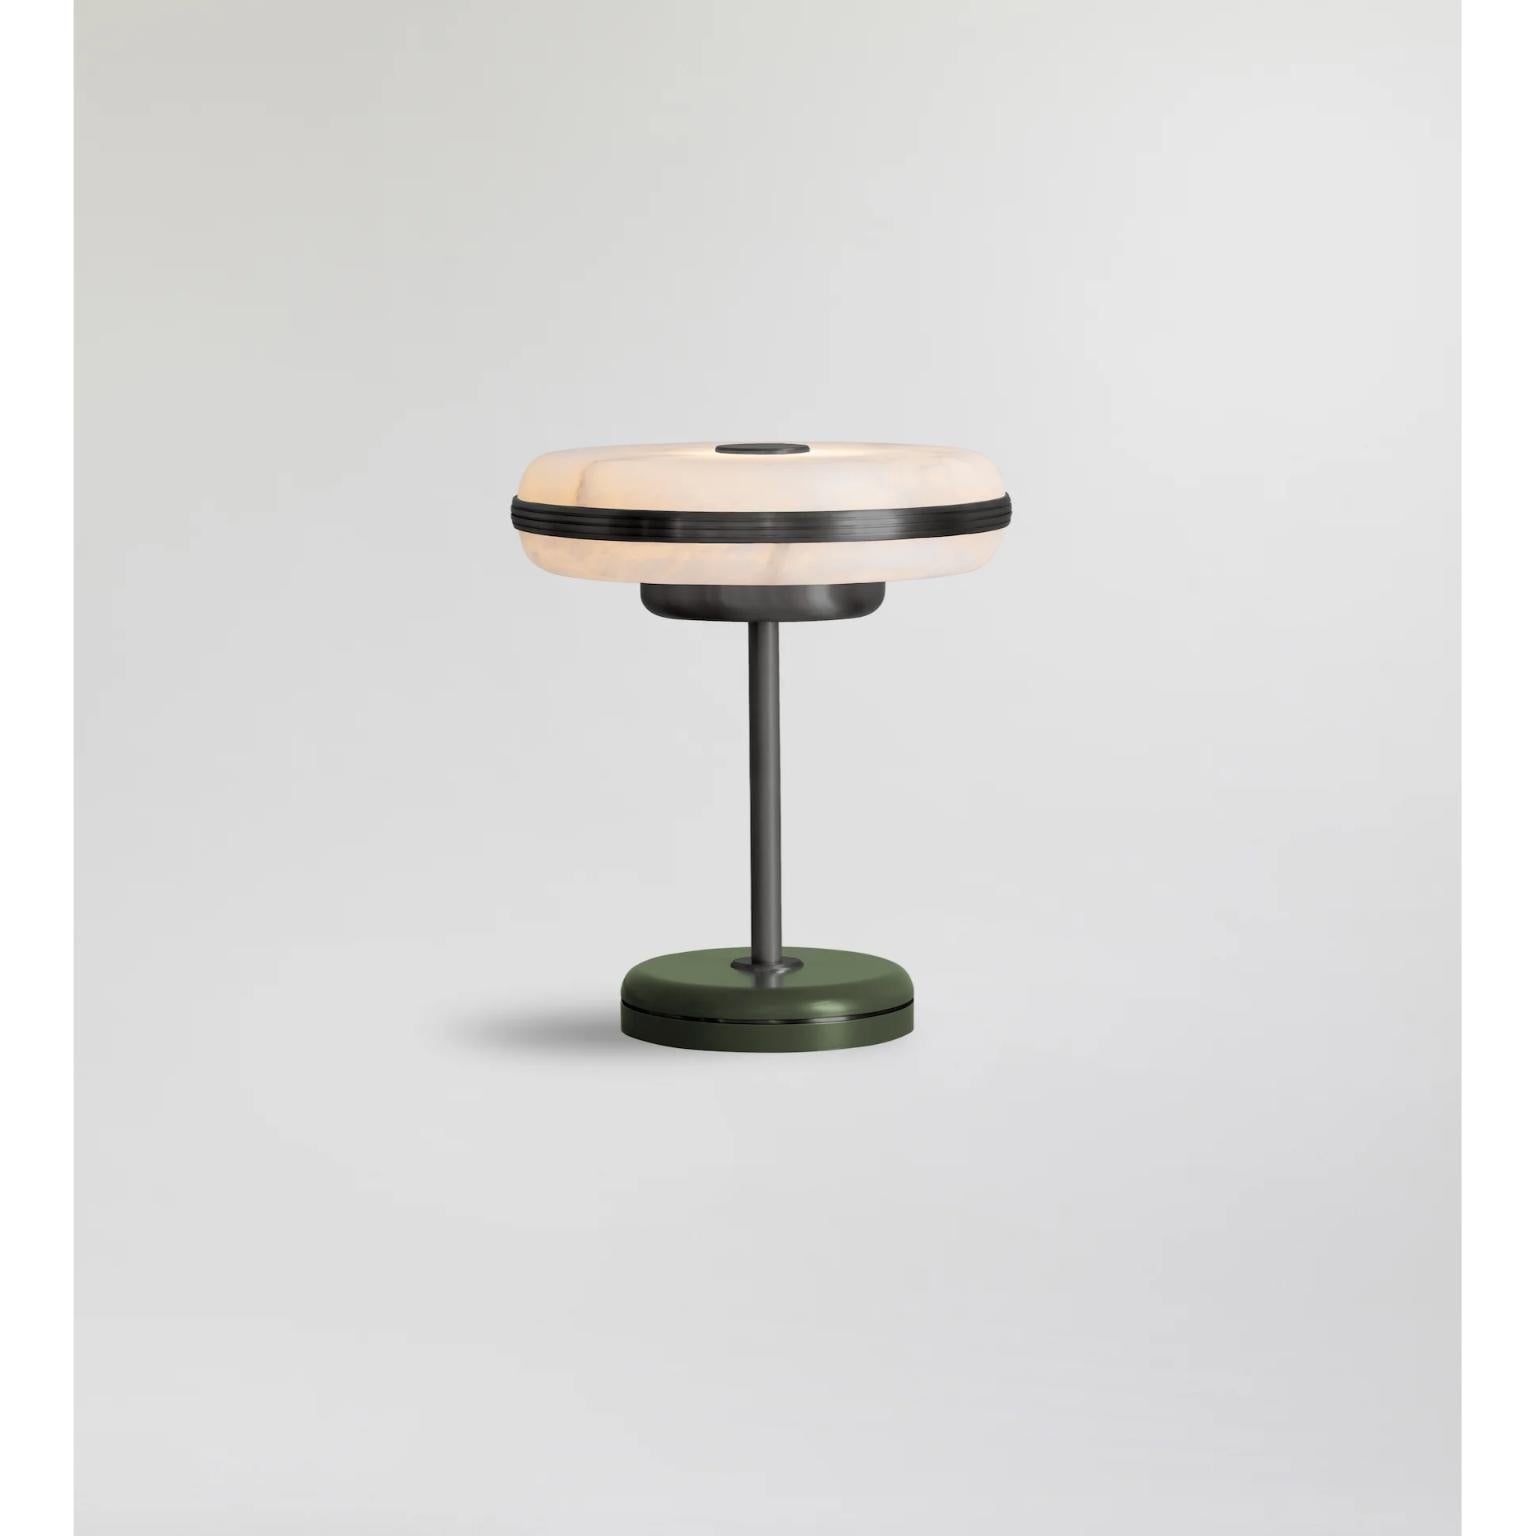 Beran Dark Bronze Small Table Lamp by Bert Frank
Dimensions: Ø 26 x H 28 cm.
Materials: Bronze and alabaster.
Base finish: Olive.

Available in two different sizes. Available in different finishes and materials. Please contact us. 

The natural